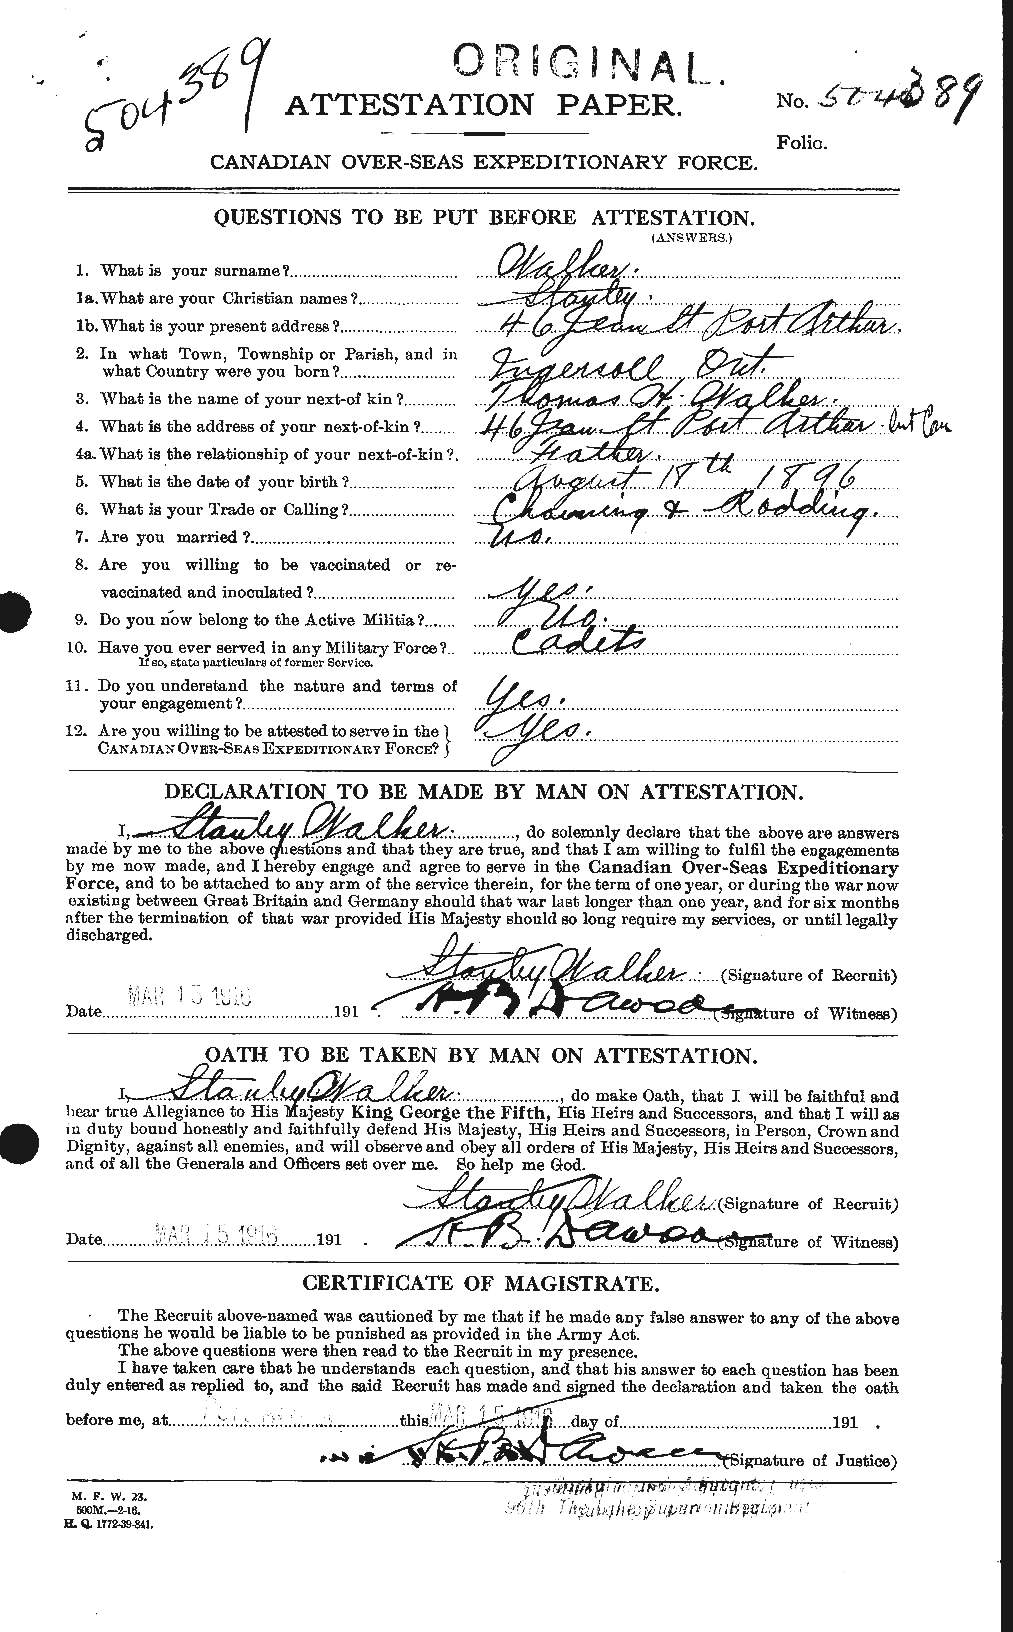 Personnel Records of the First World War - CEF 655775a